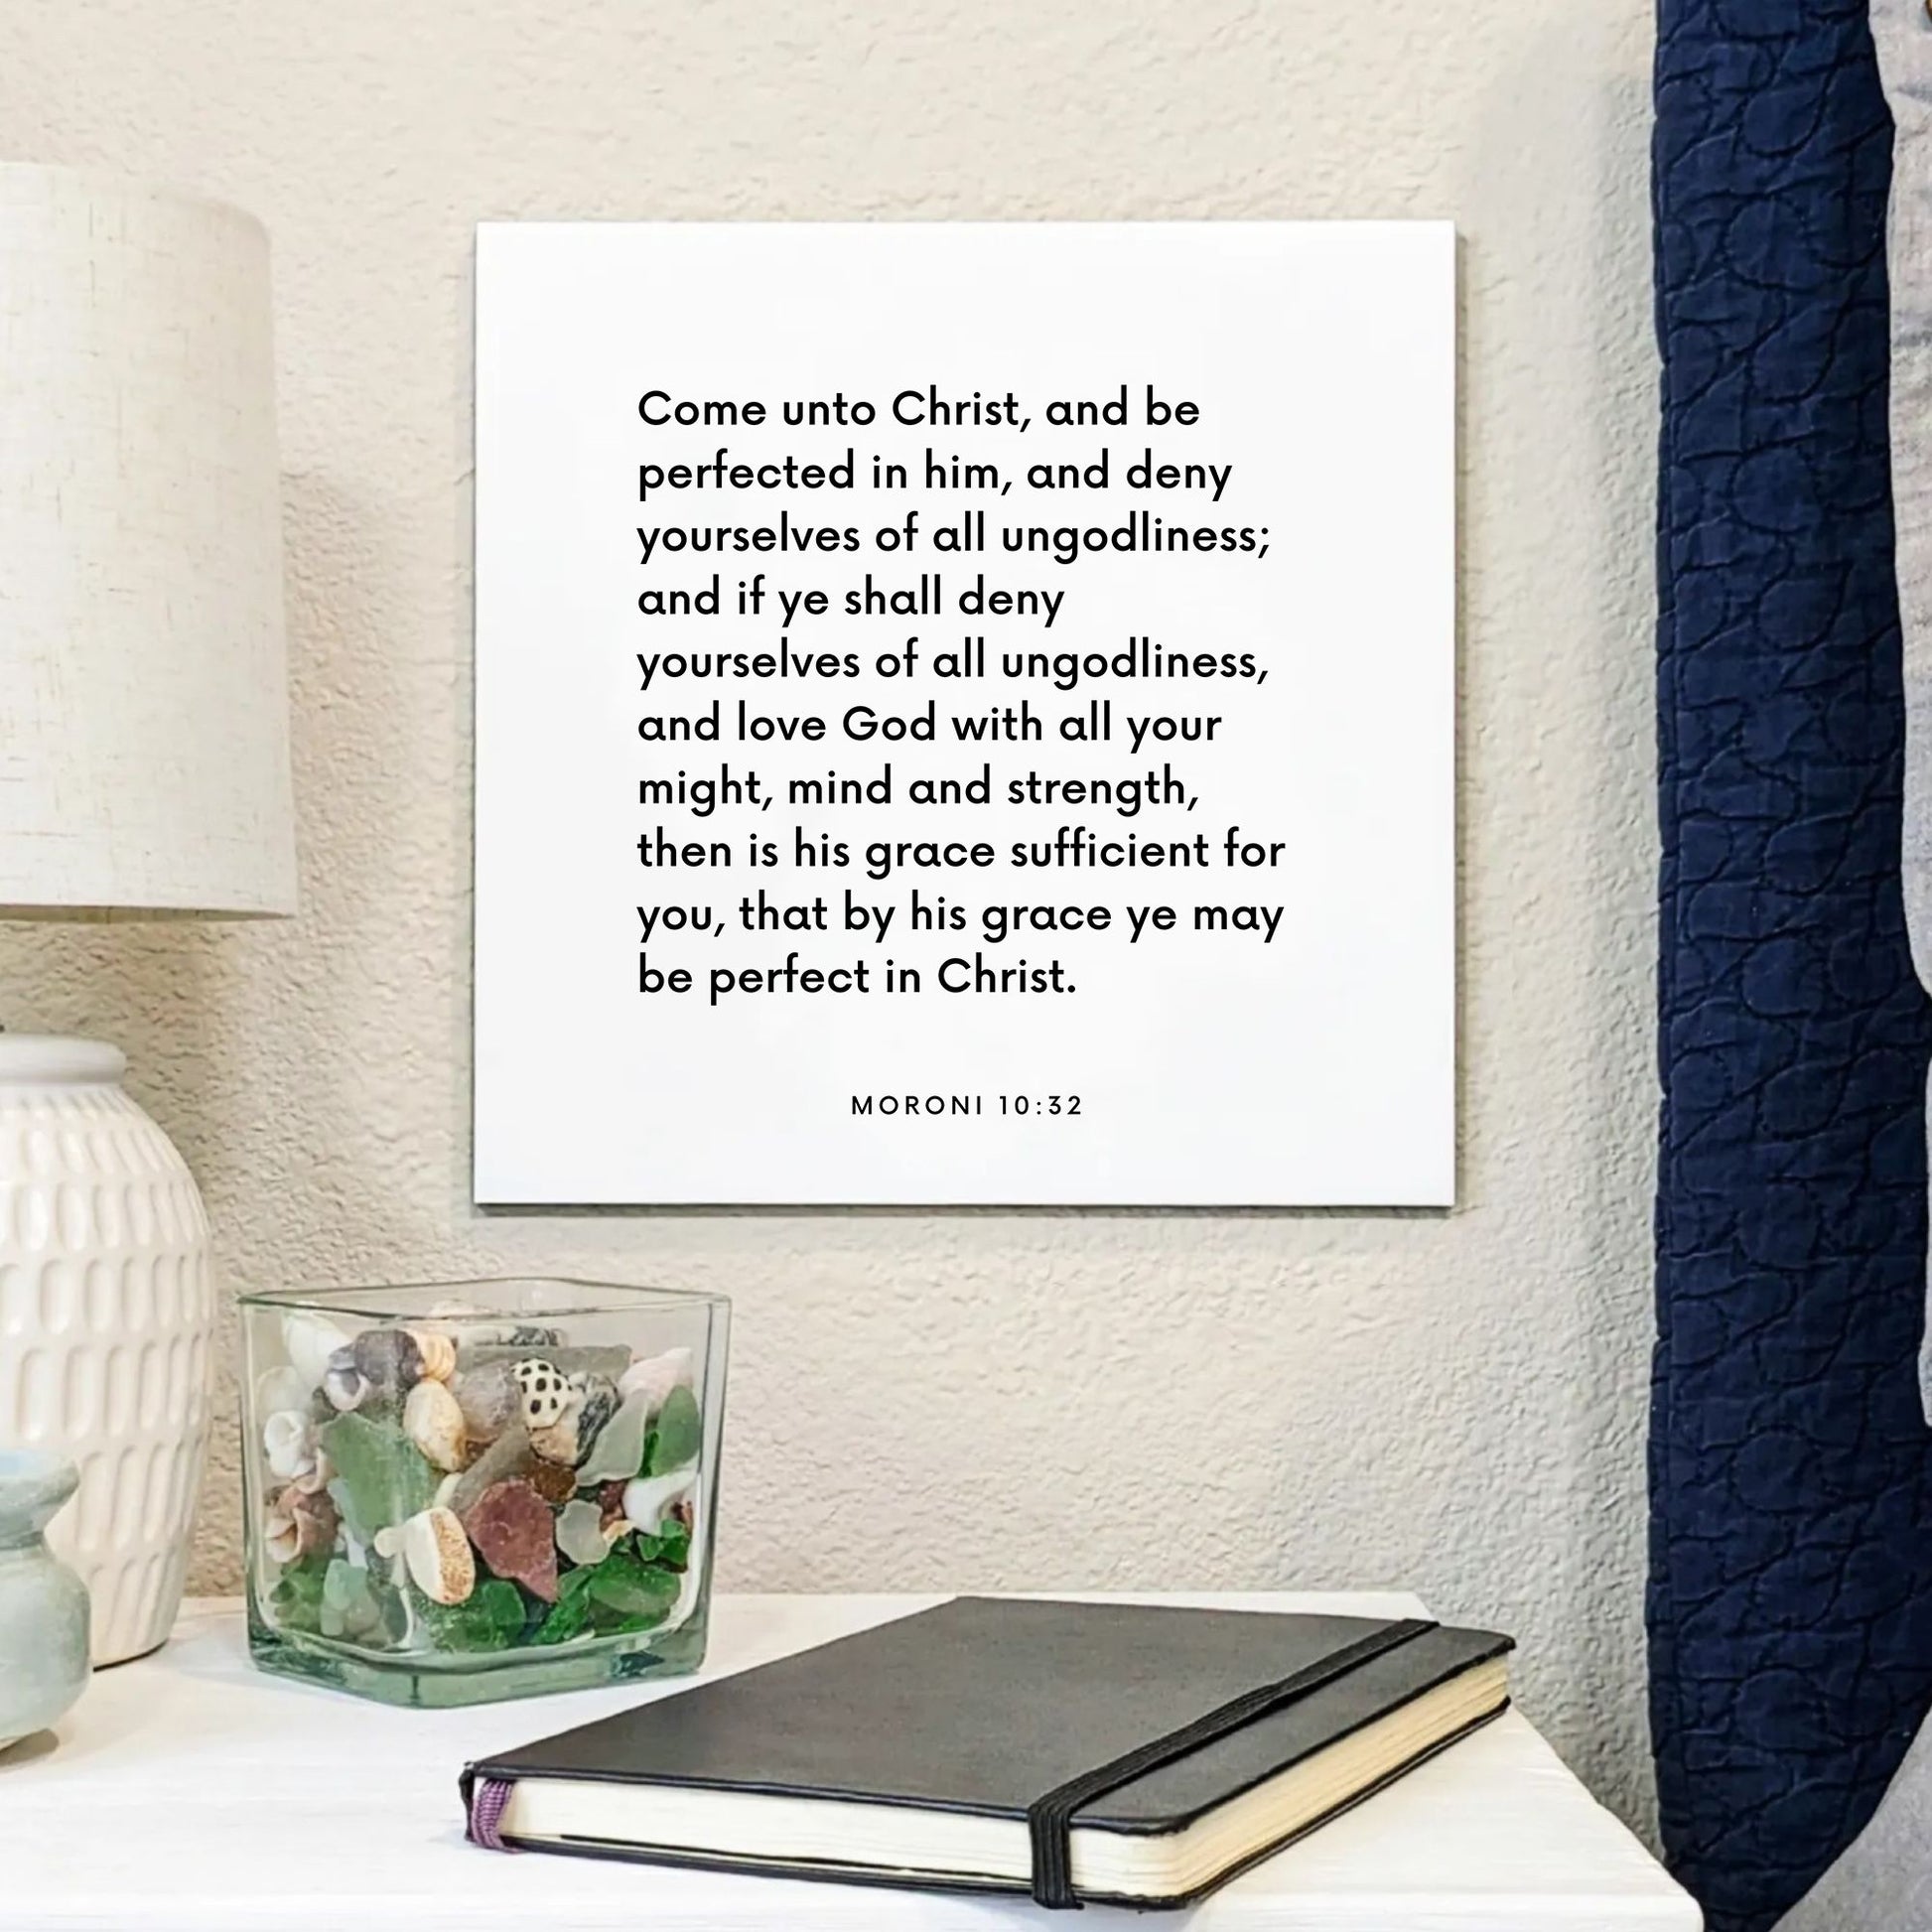 Bedside mouting of the scripture tile for Moroni 10:32 - "Come unto Christ, and be perfected in him"